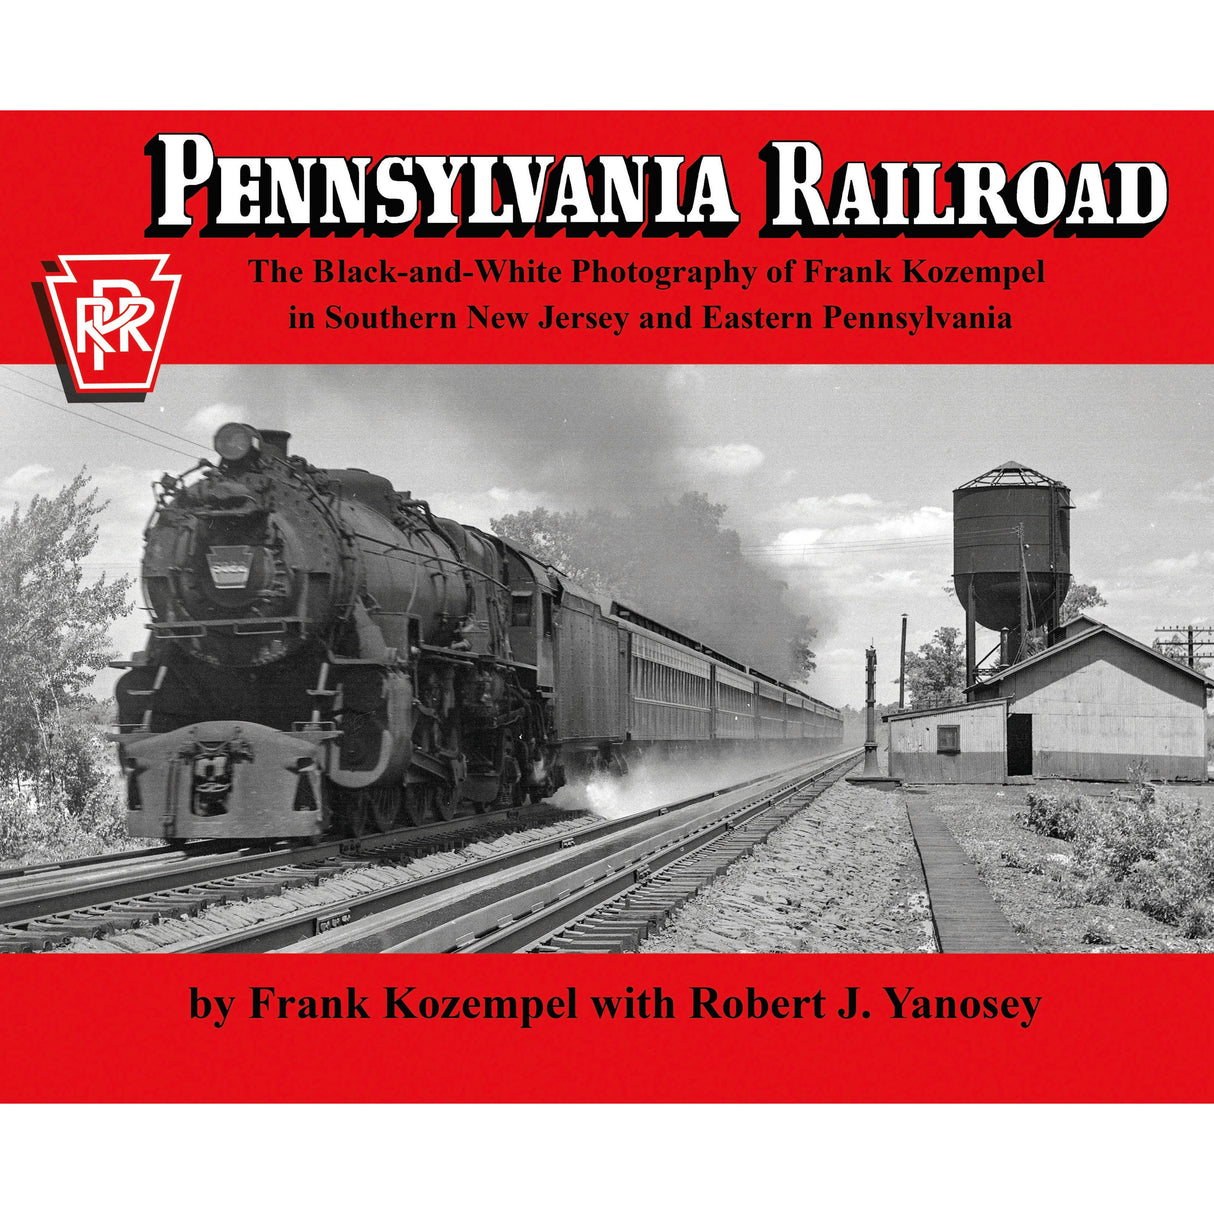 Morning Sun Books Pennsylvania Railroad<br>The Black-and-White Photography of Frank Kozempel in Southern New Jersey and Eastern Pennsylvania (Softcover)